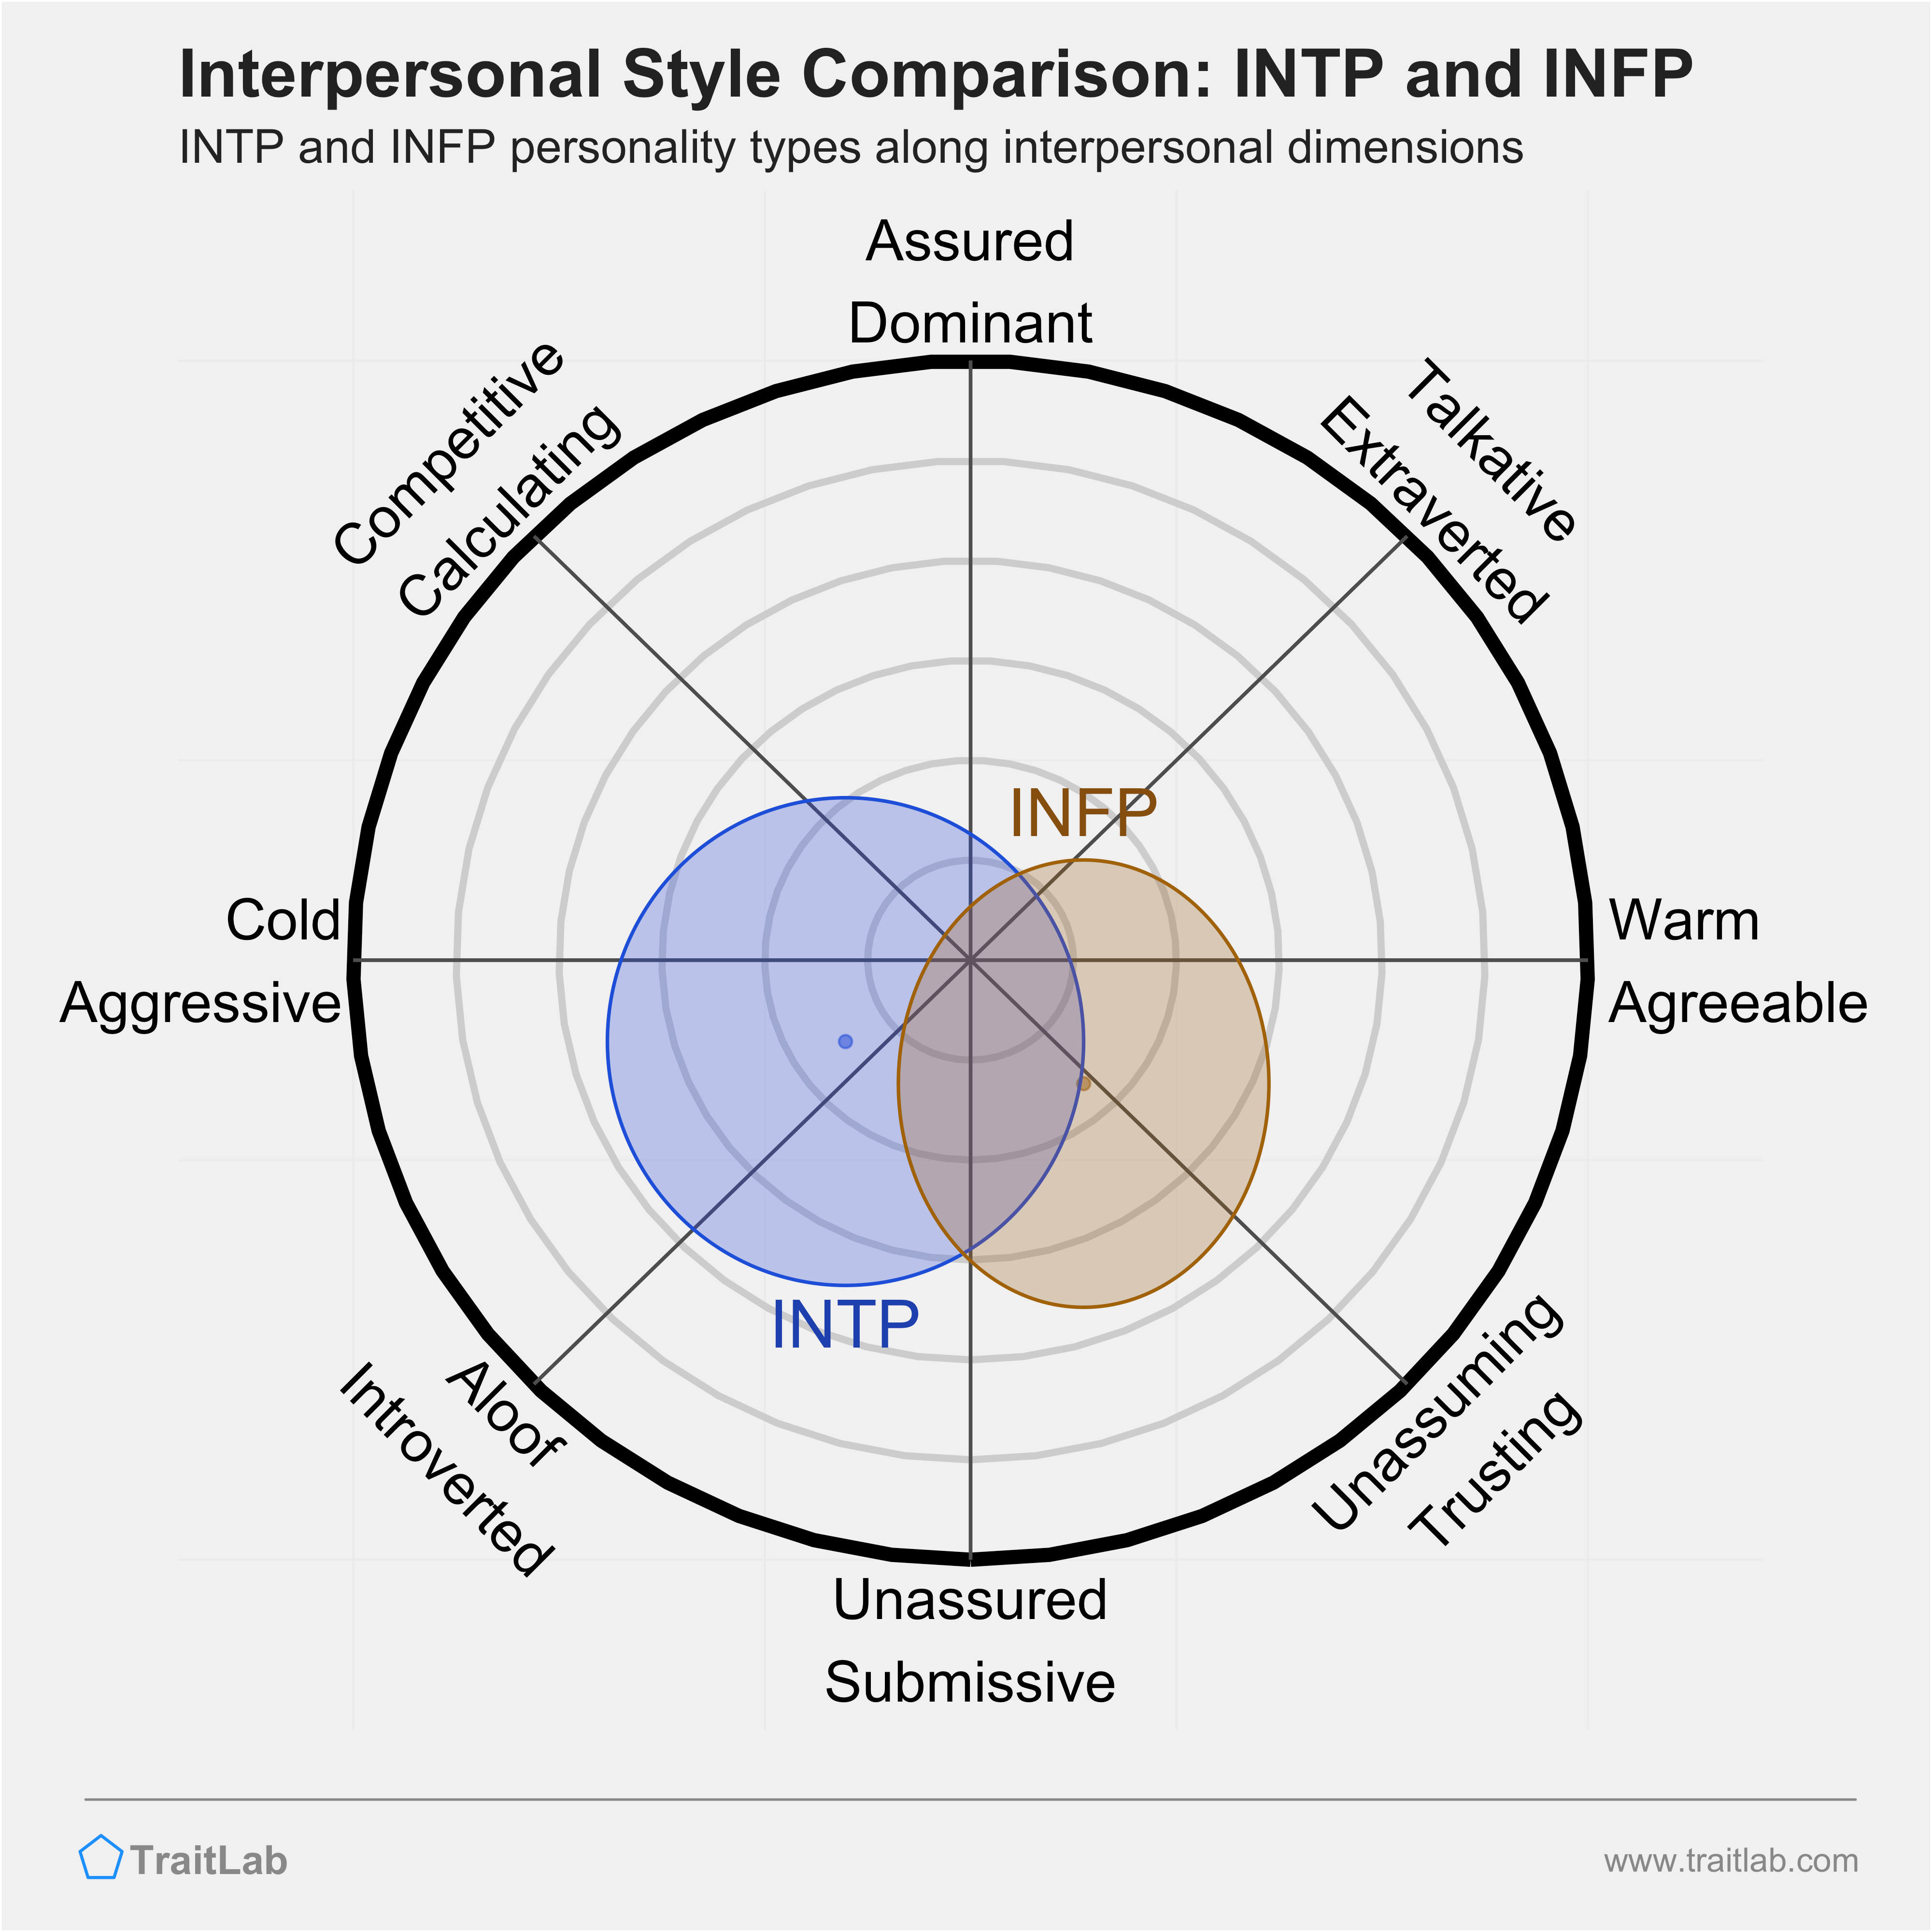 INTP and INFP comparison across interpersonal dimensions